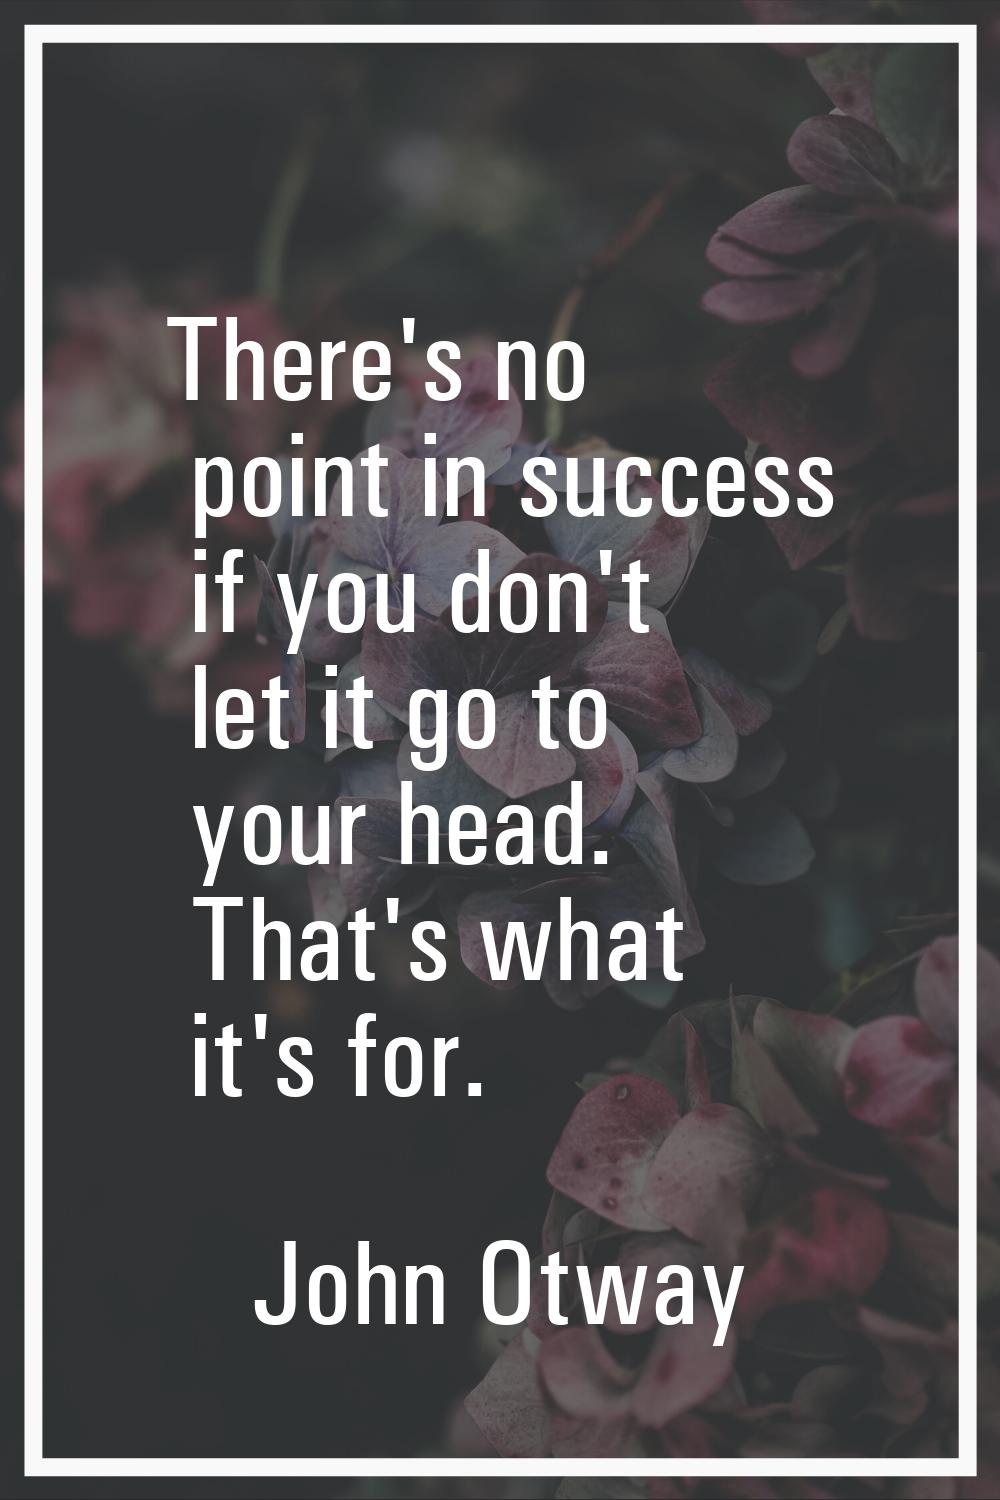 There's no point in success if you don't let it go to your head. That's what it's for.